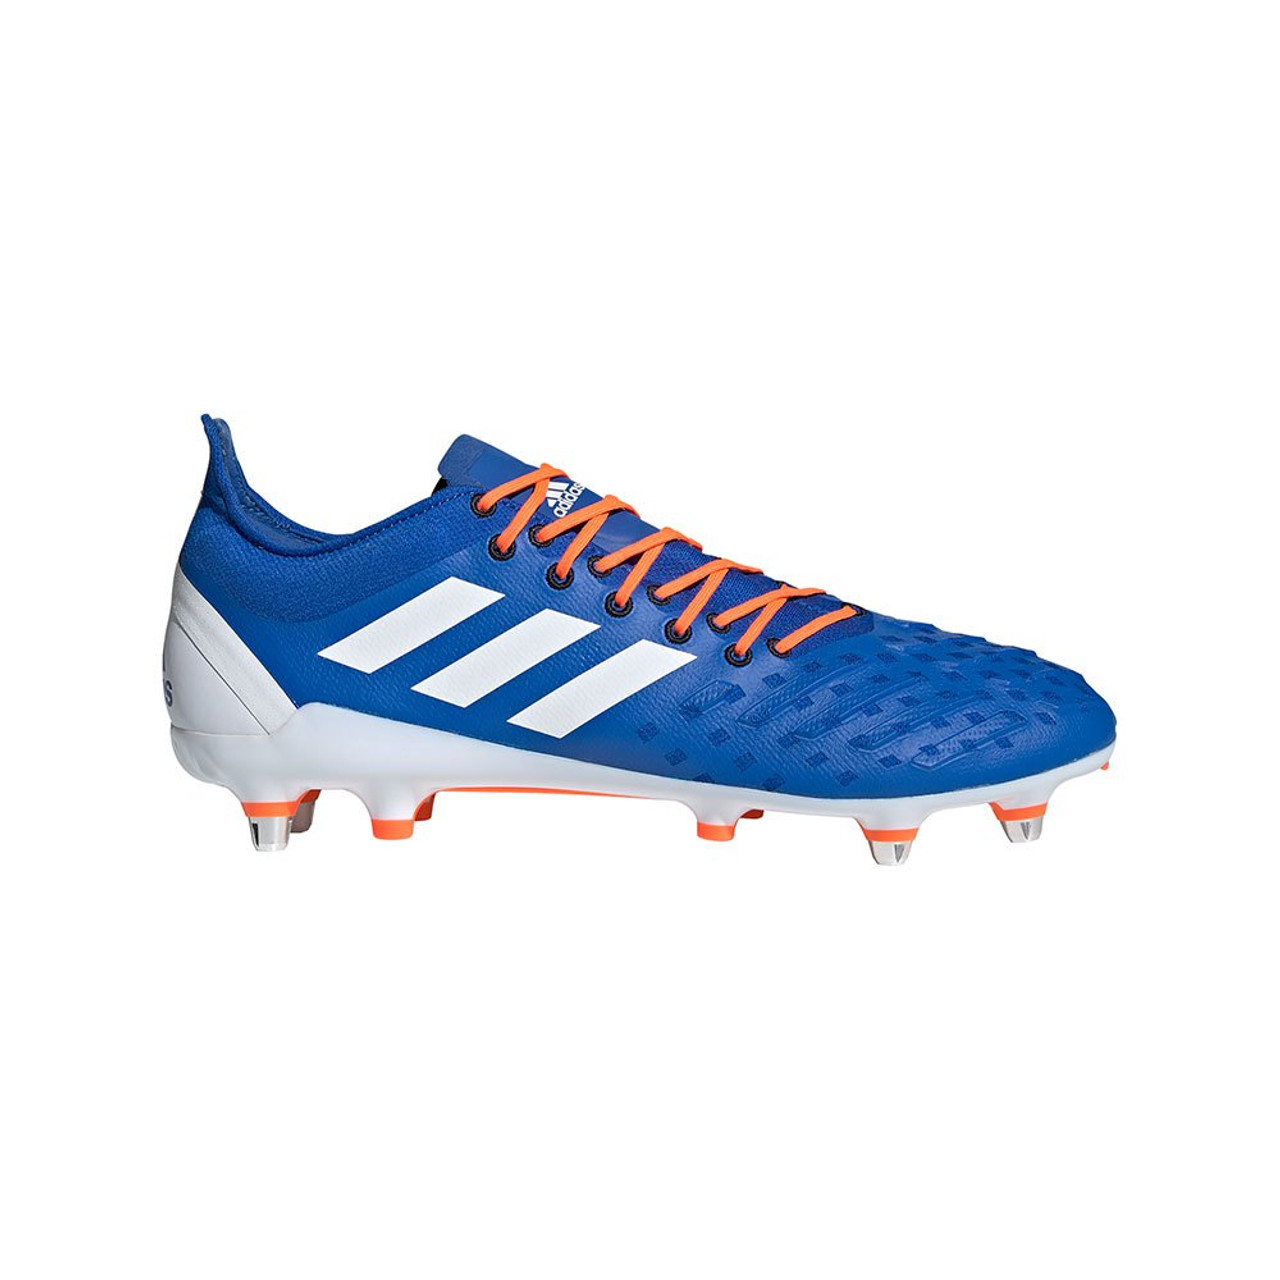 Adidas Predator Xp Sg Rugby Cleat Blue On Sale At Rugby City